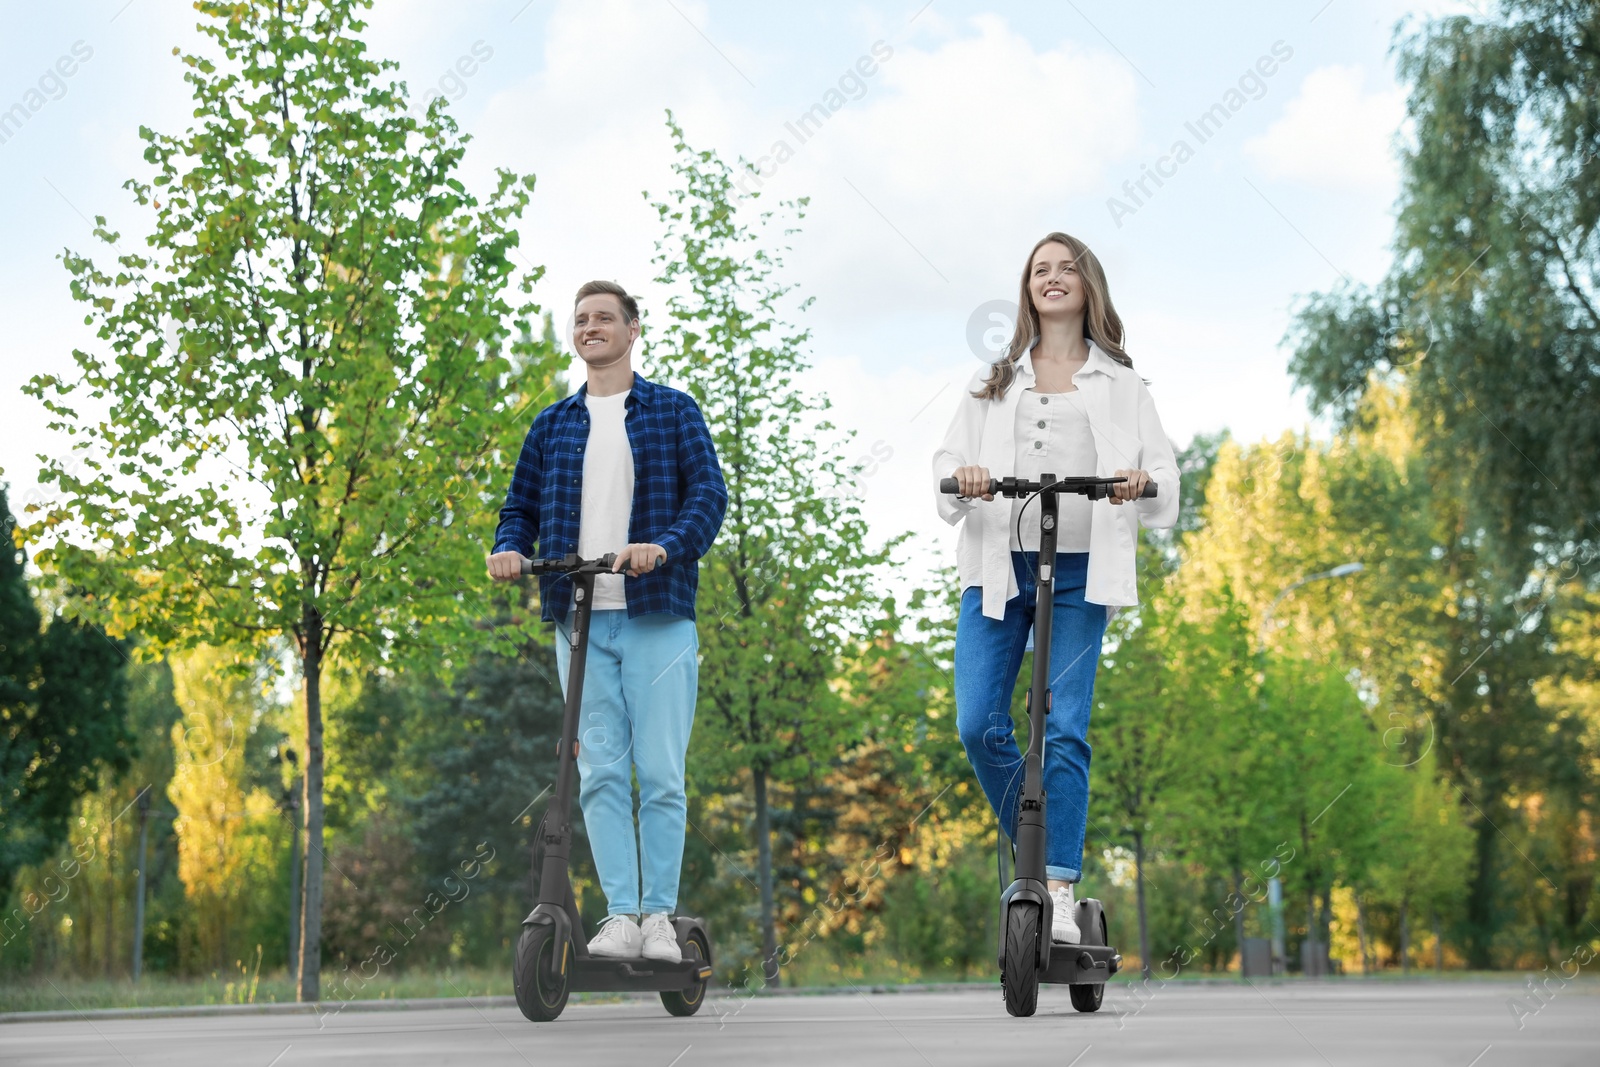 Photo of Happy couple riding modern electric kick scooters in park, low angle view